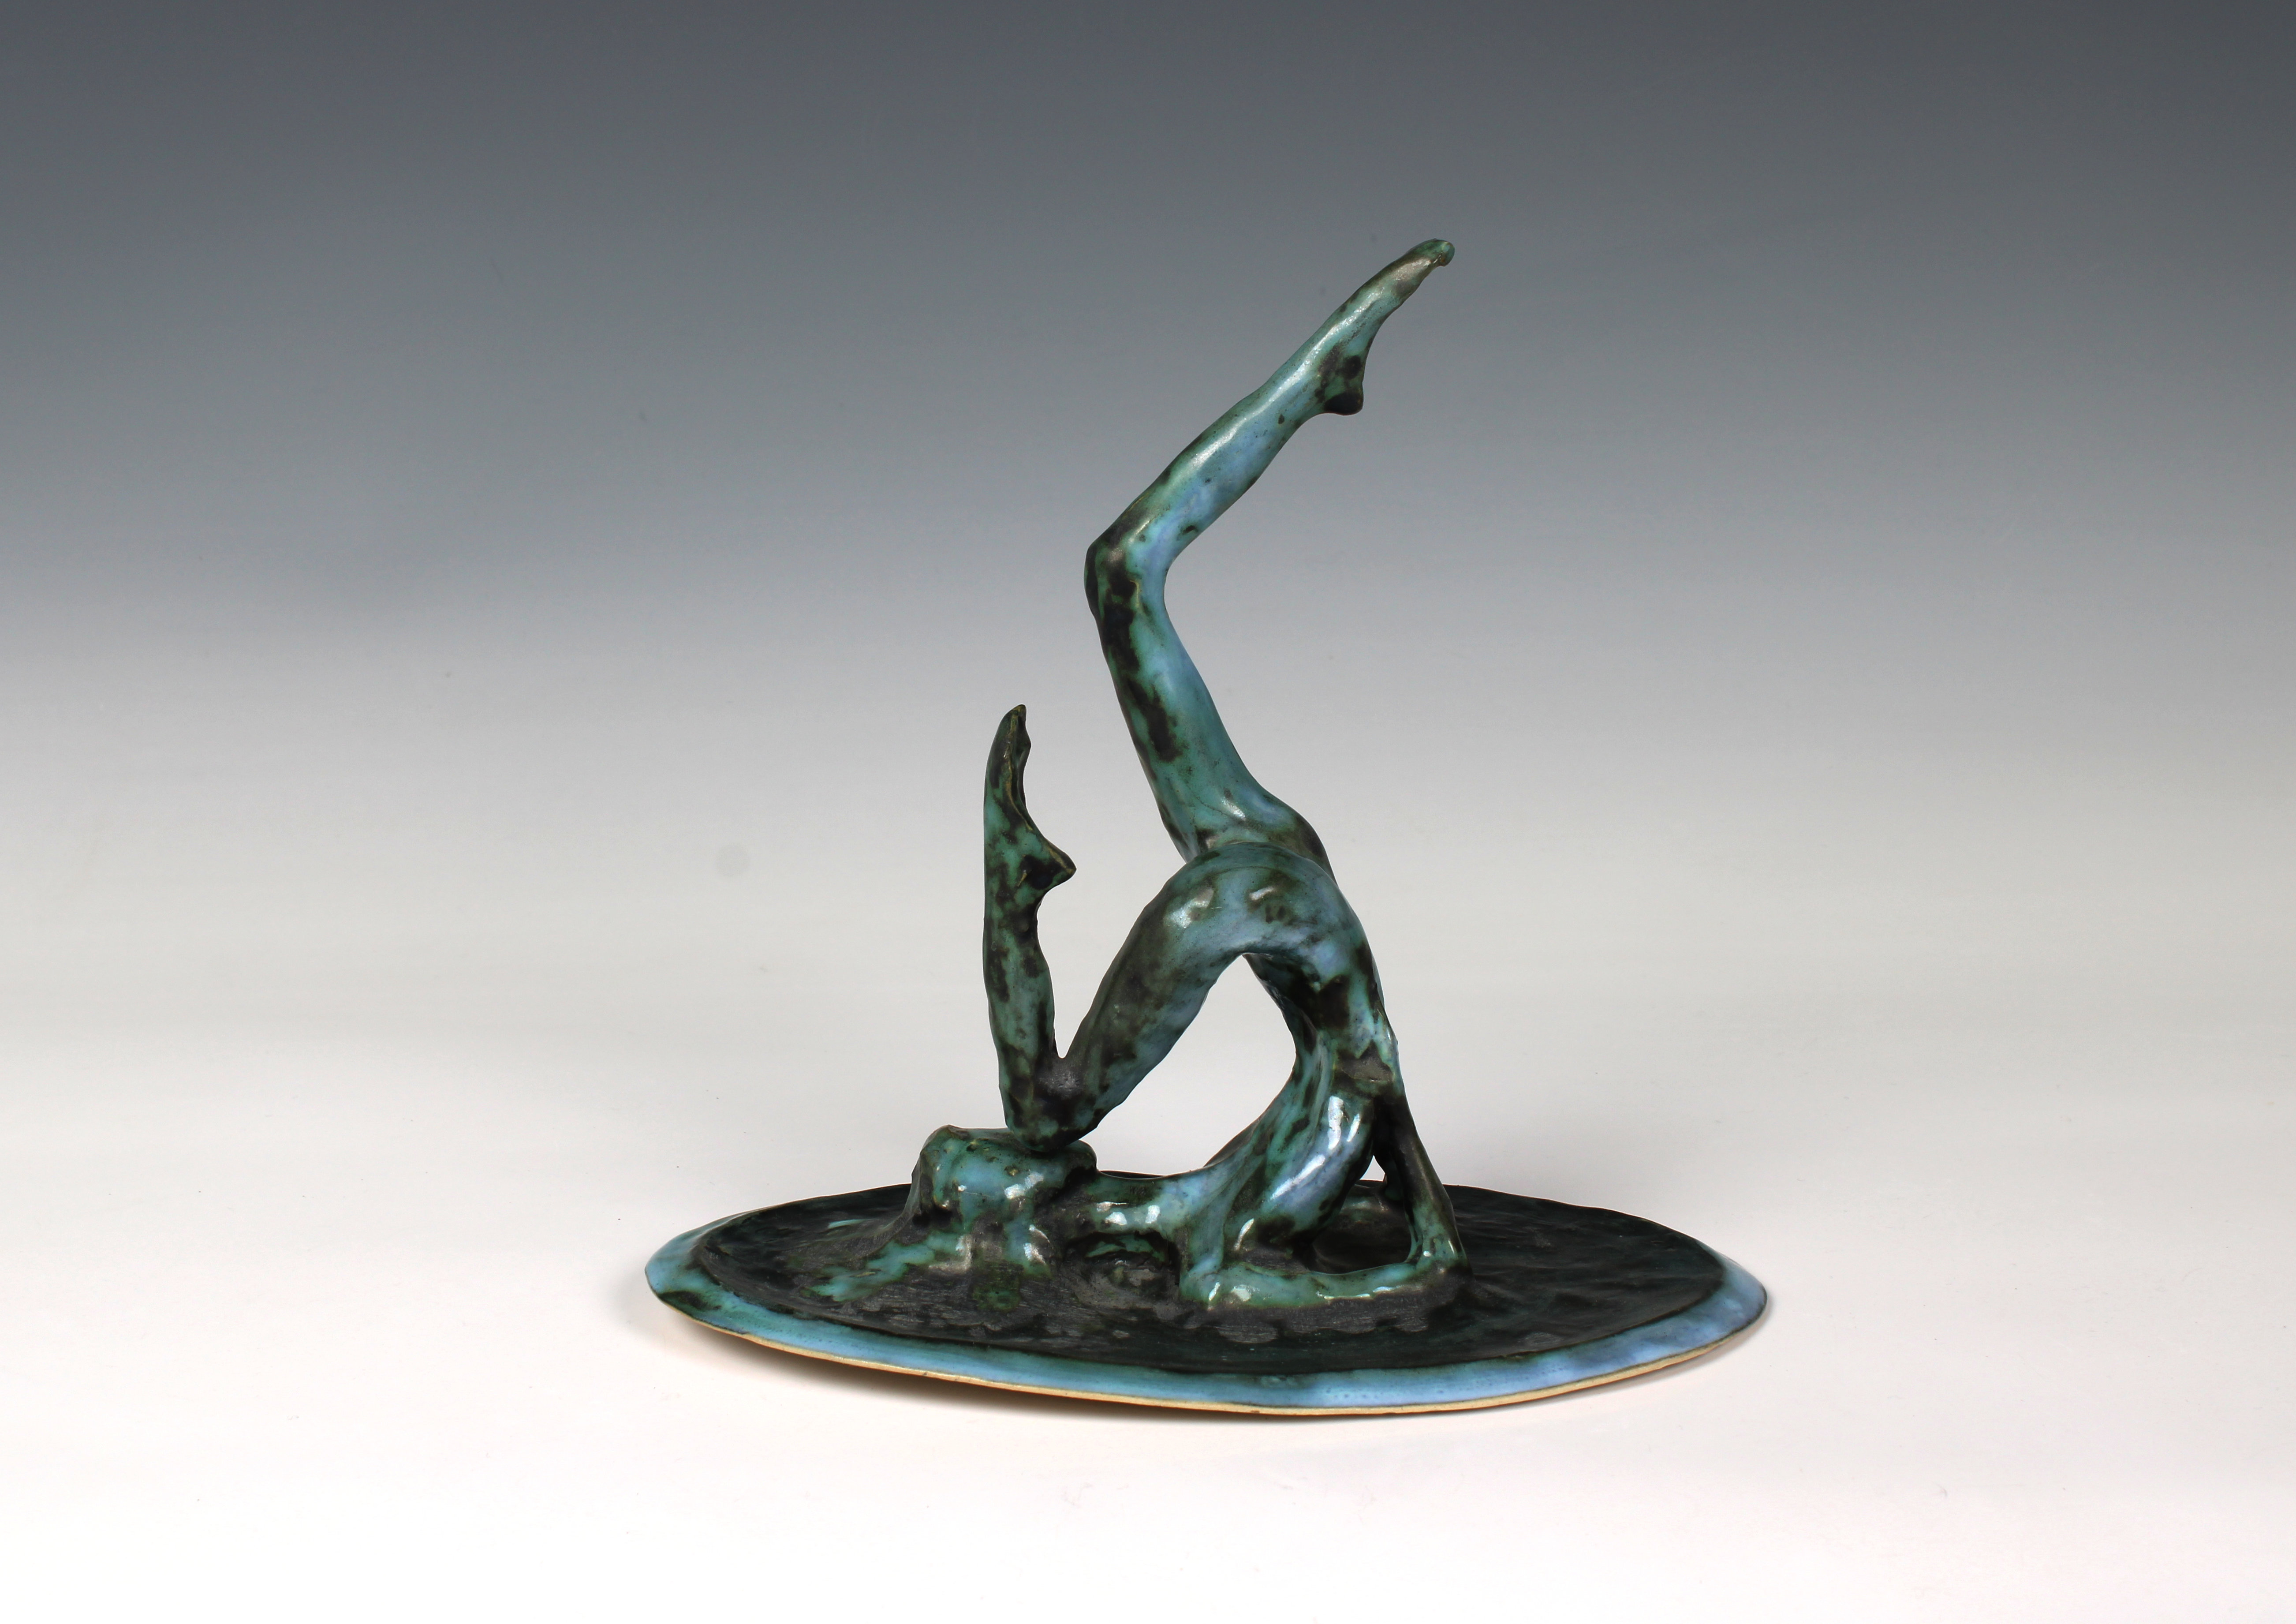 Elizabeth Ann Macphail (1939-89) glazed sculpture featuring a stylised figure doing exercise - Image 3 of 7